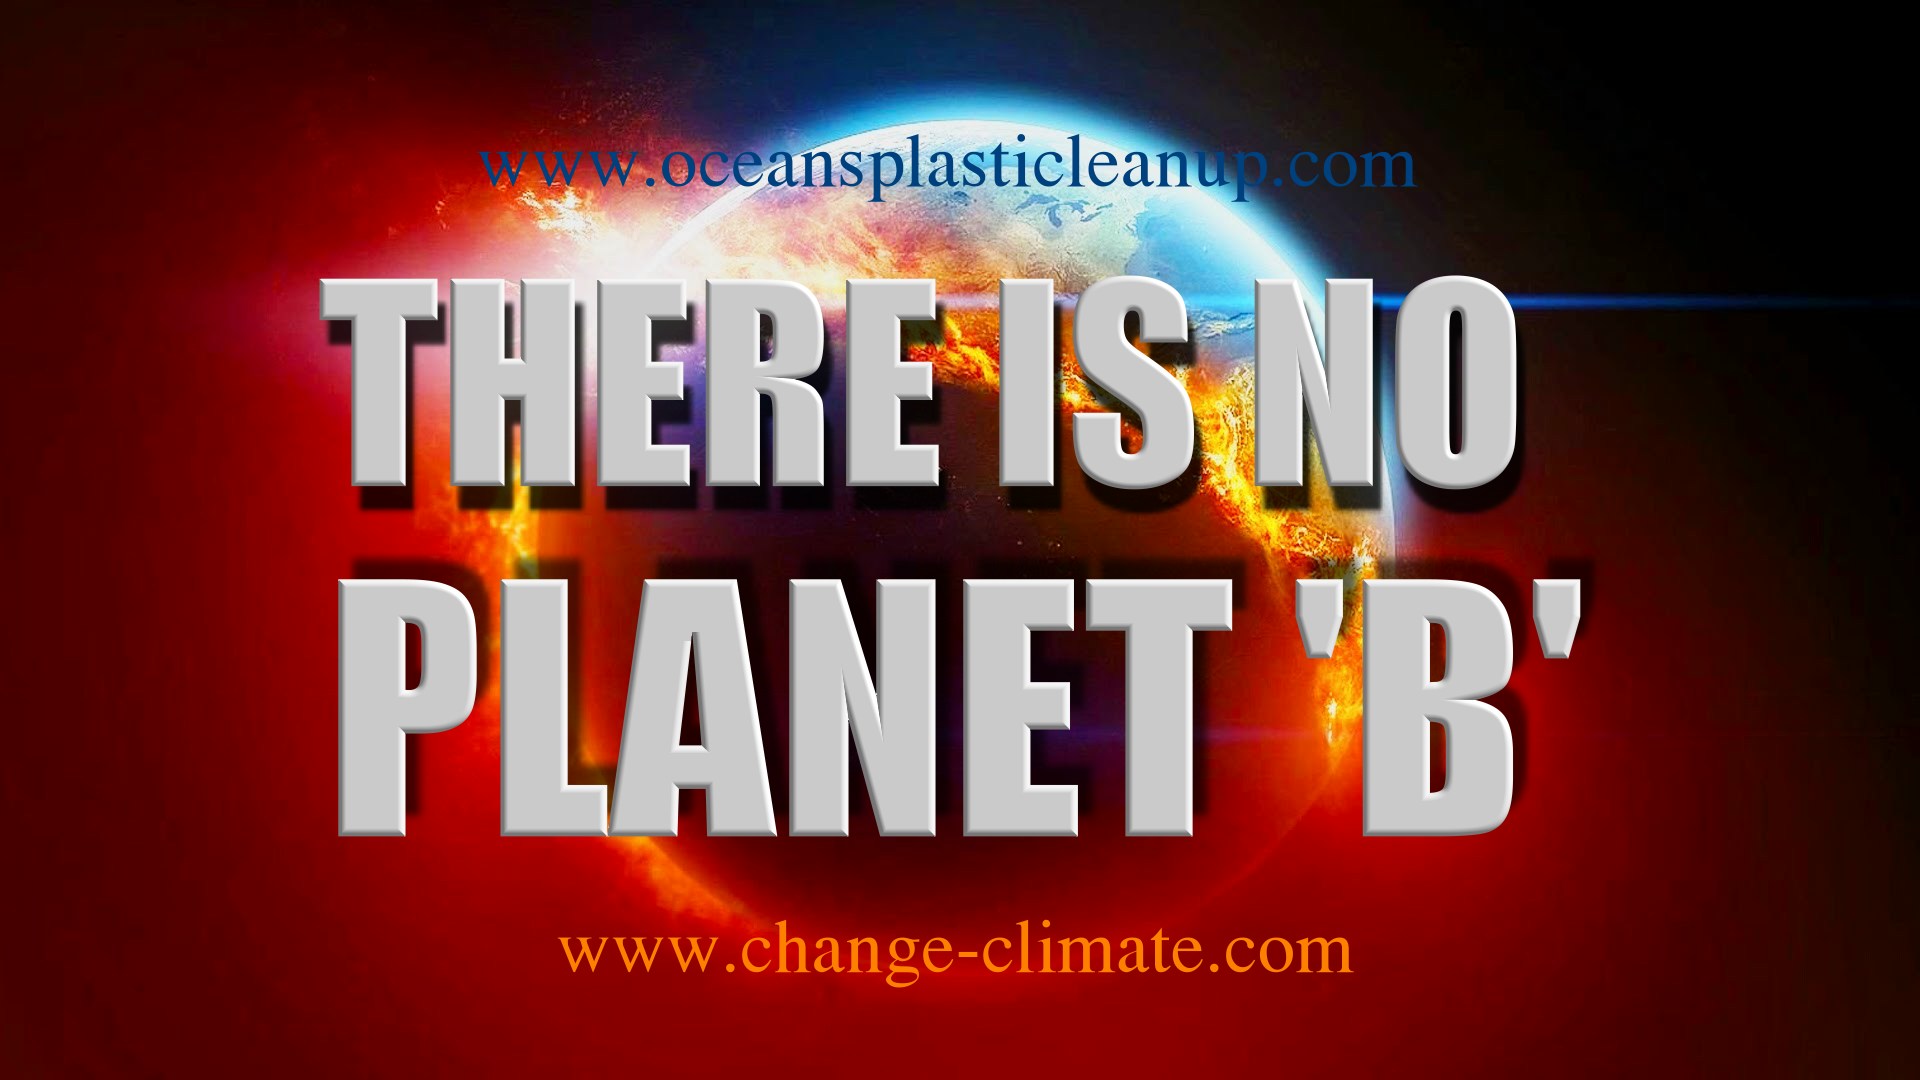 There is no planet B at the moment, so keep dreaming and perish or act to save what we have